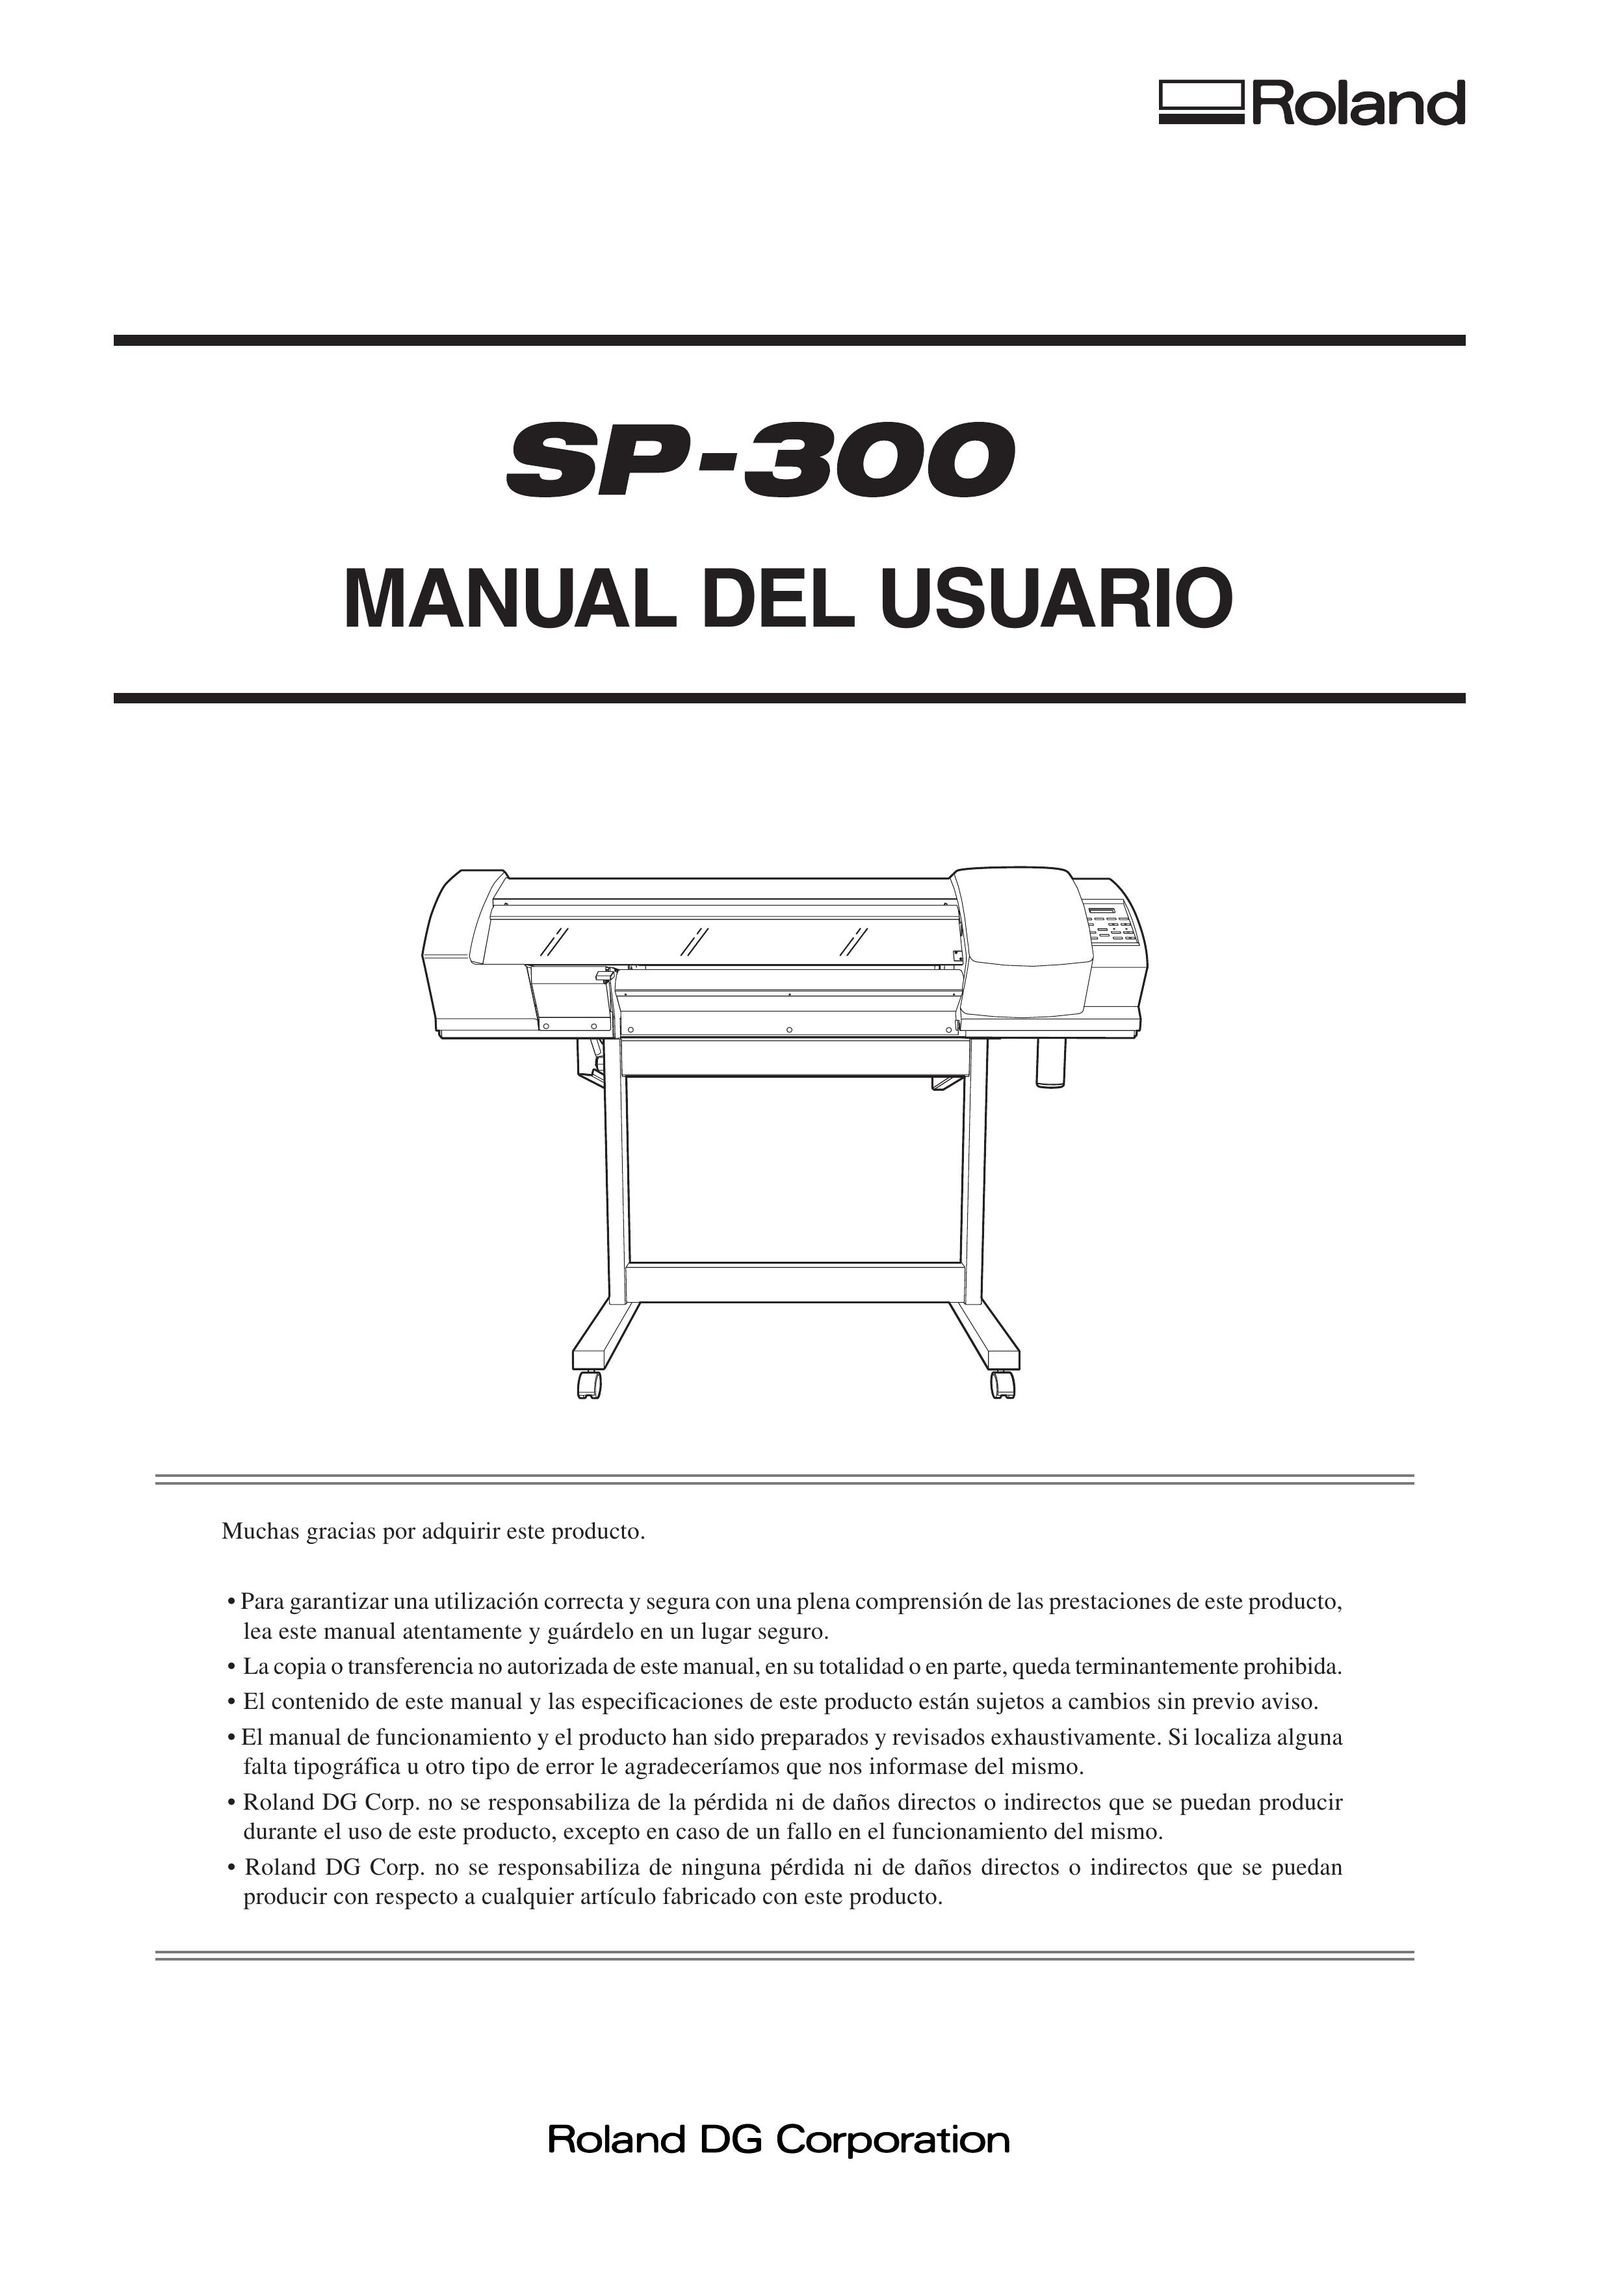 Roland SP-300 All in One Printer User Manual